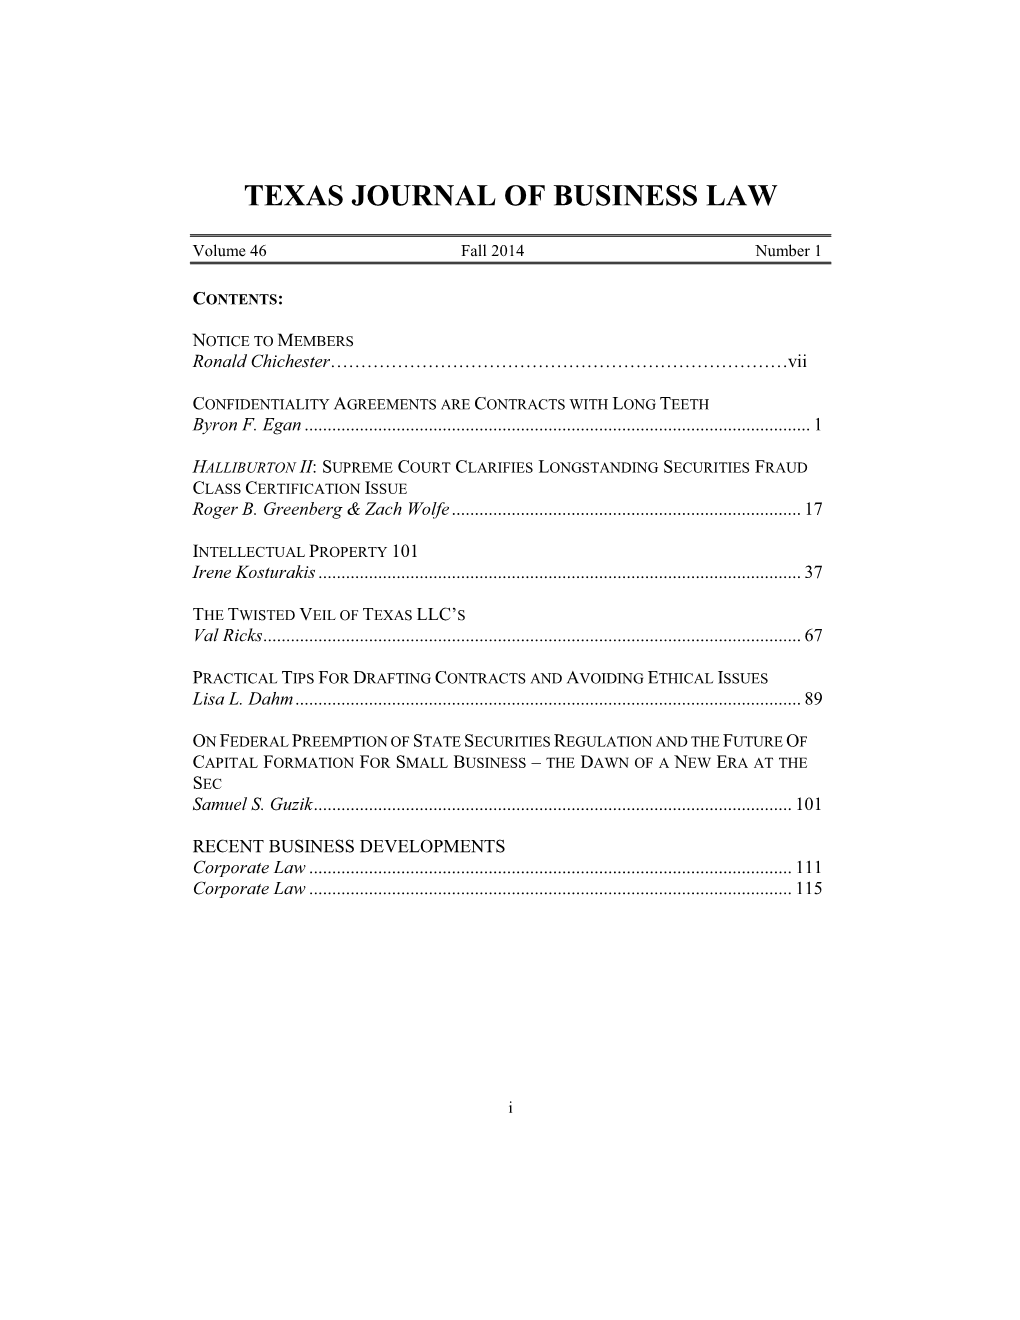 Texas Journal of Business Law